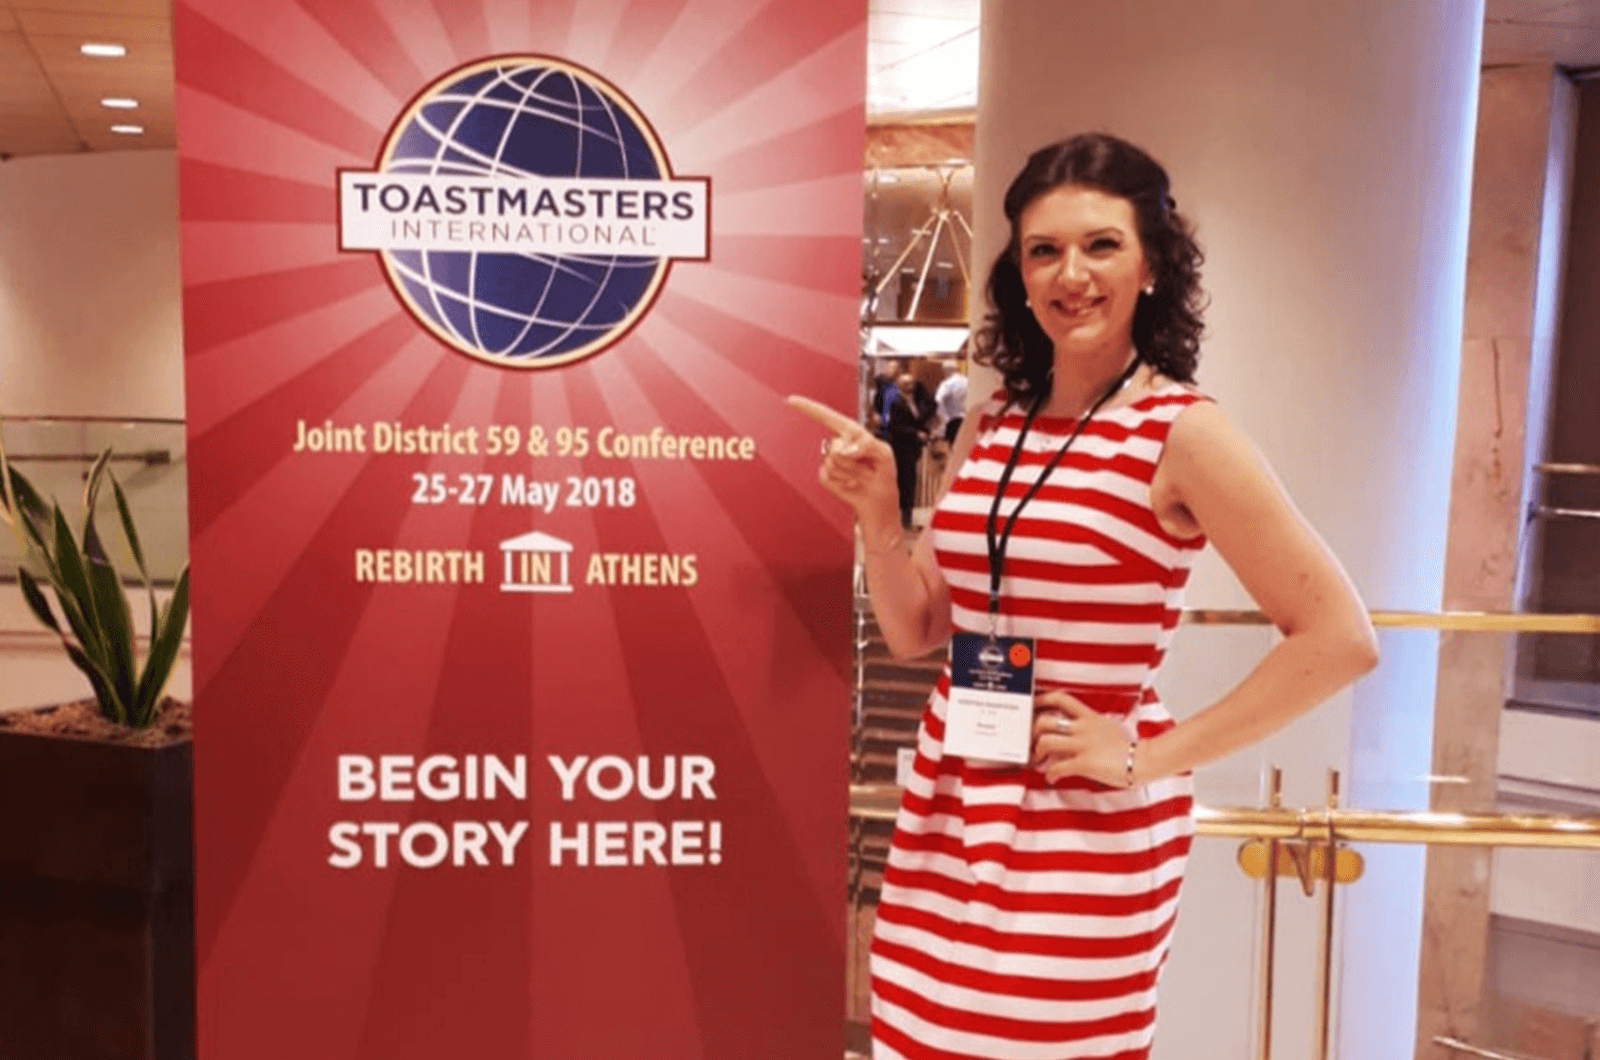 Kristina Sharykina was introduced to Toastmasters by her boyfriend Alex de Jong, who was introduced by his father. 